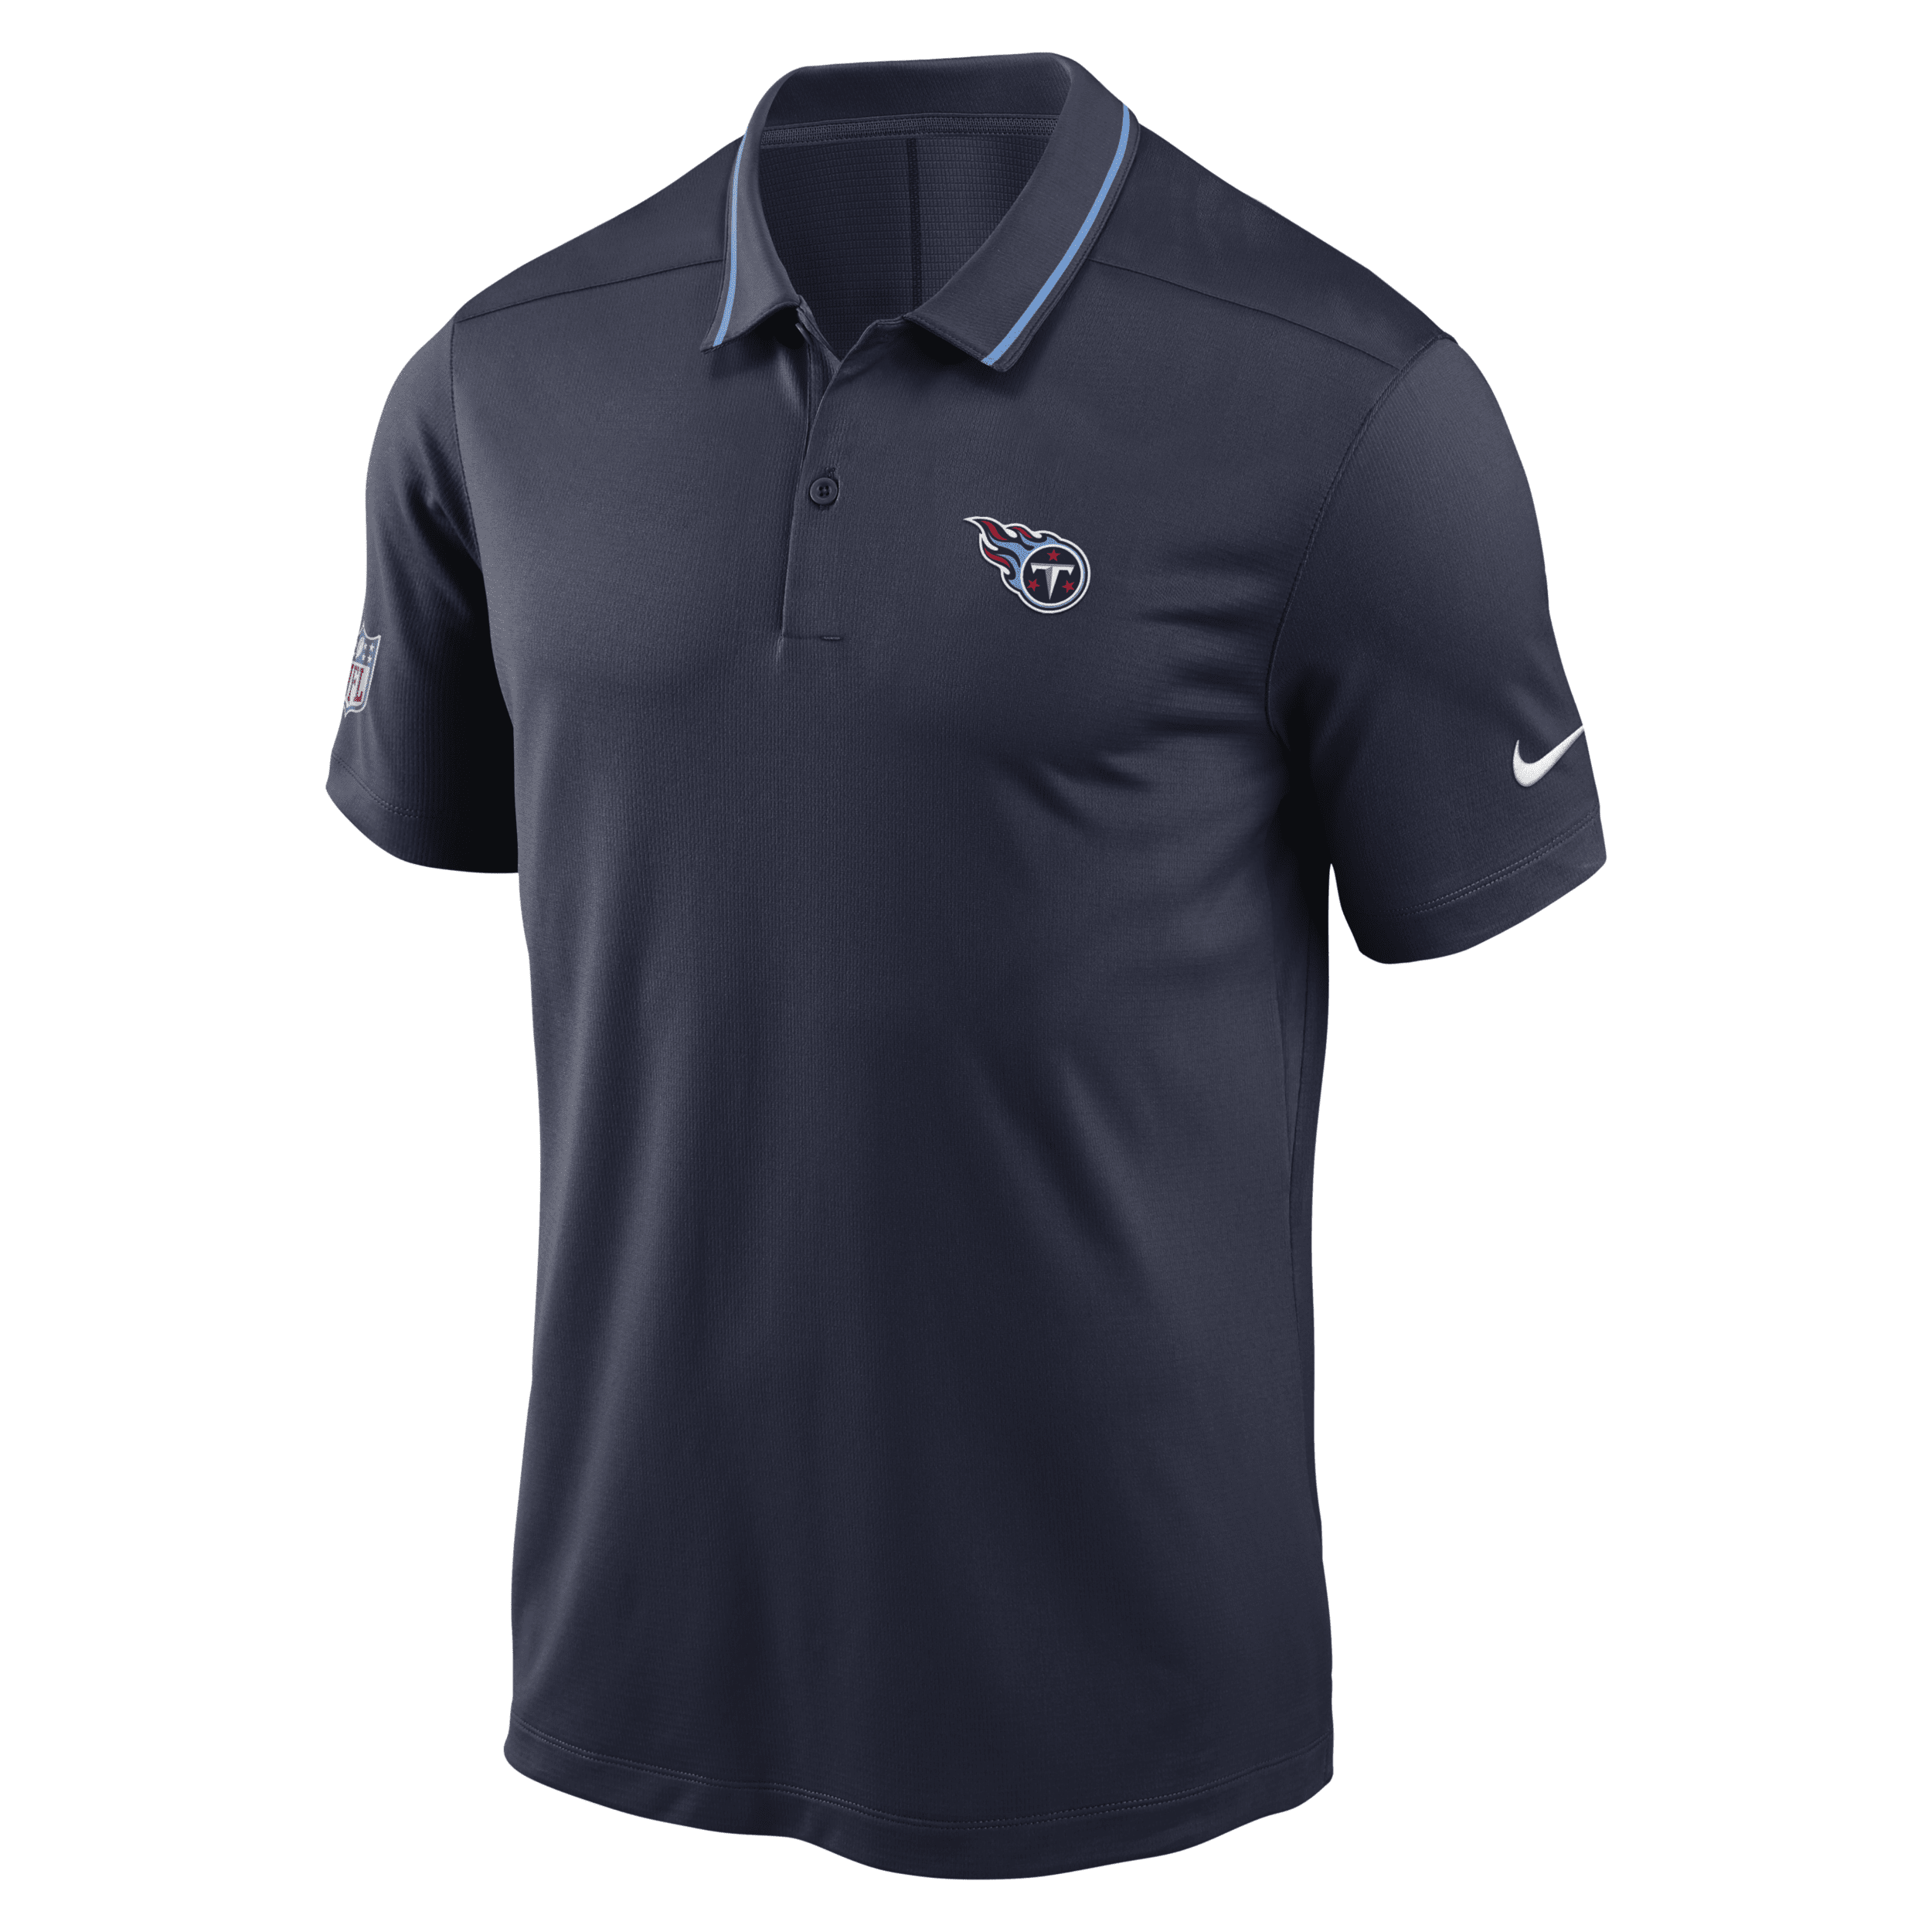 Nike Men's Dri-fit Sideline Victory (nfl Tennessee Titans) Polo In Blue